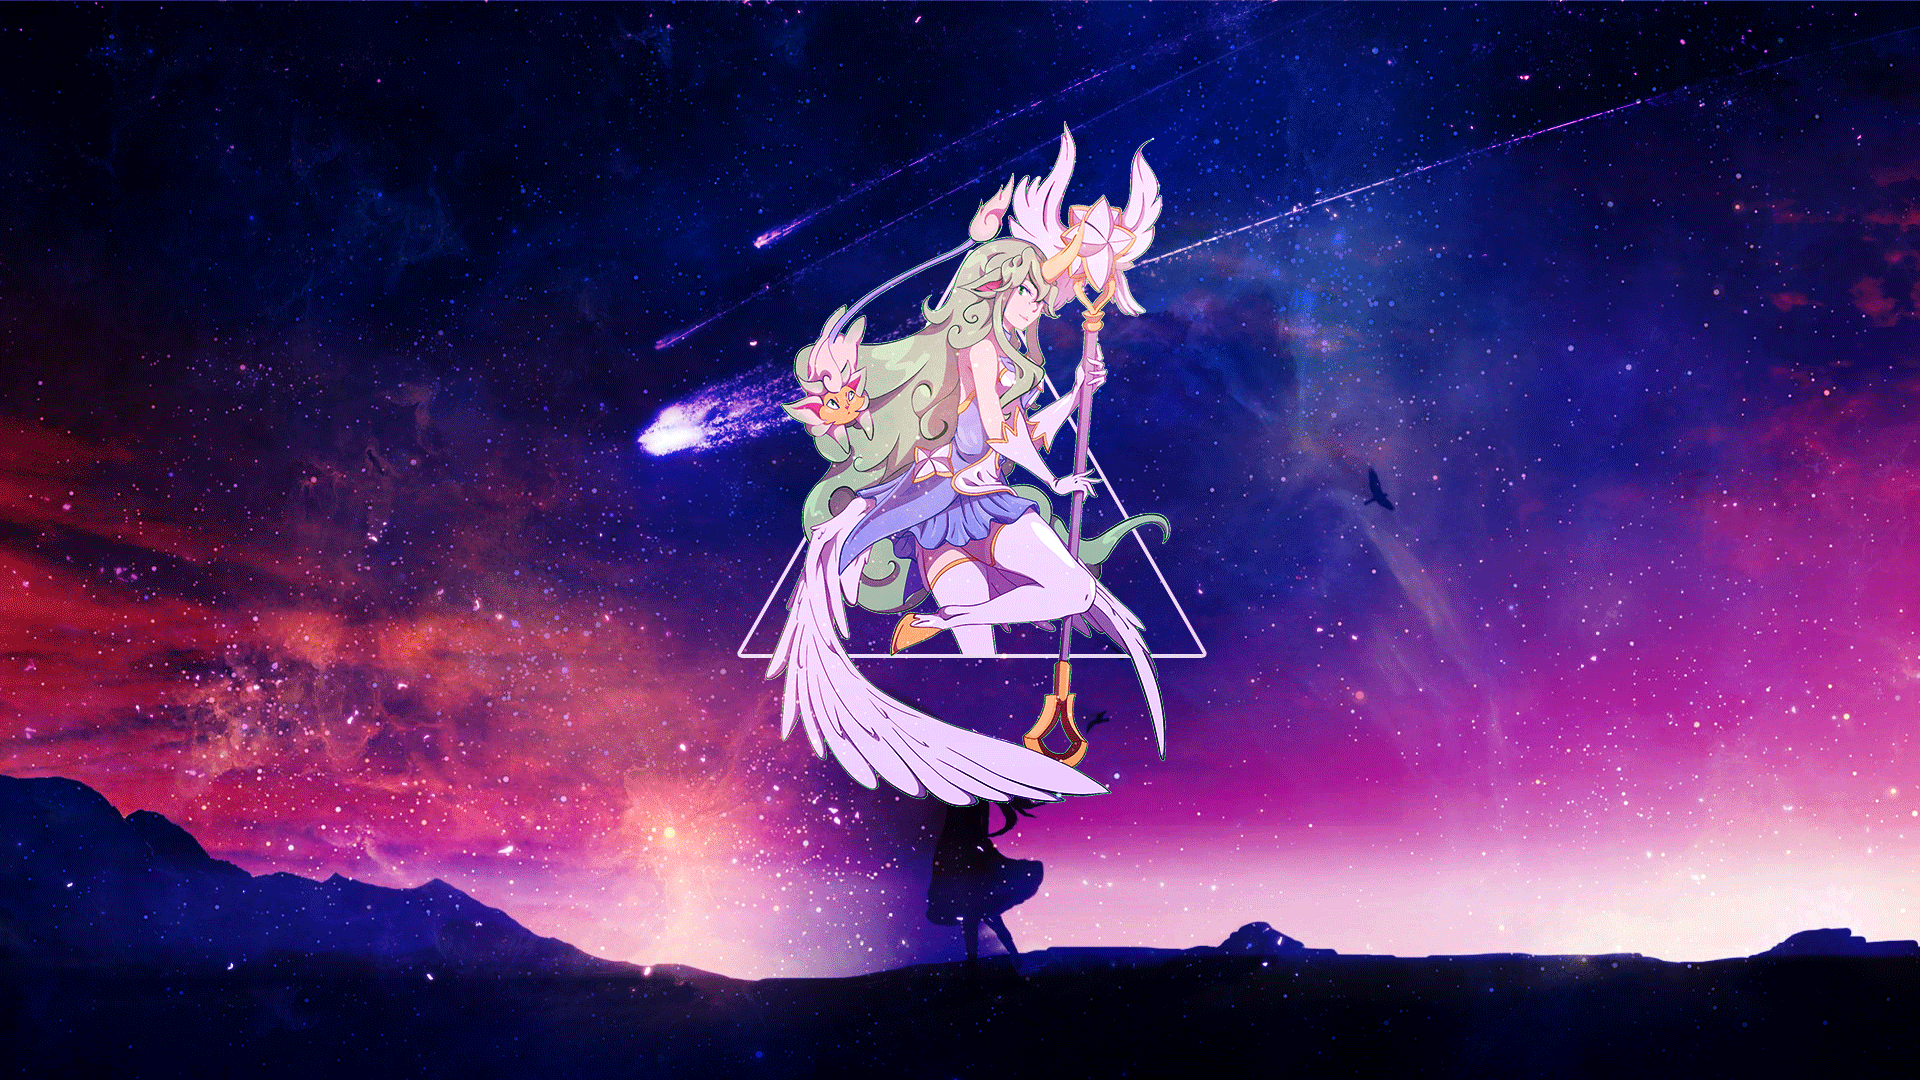 General 1920x1080 League of Legends Soraka (League of Legends) video game art PC gaming photoshopped picture-in-picture digital art